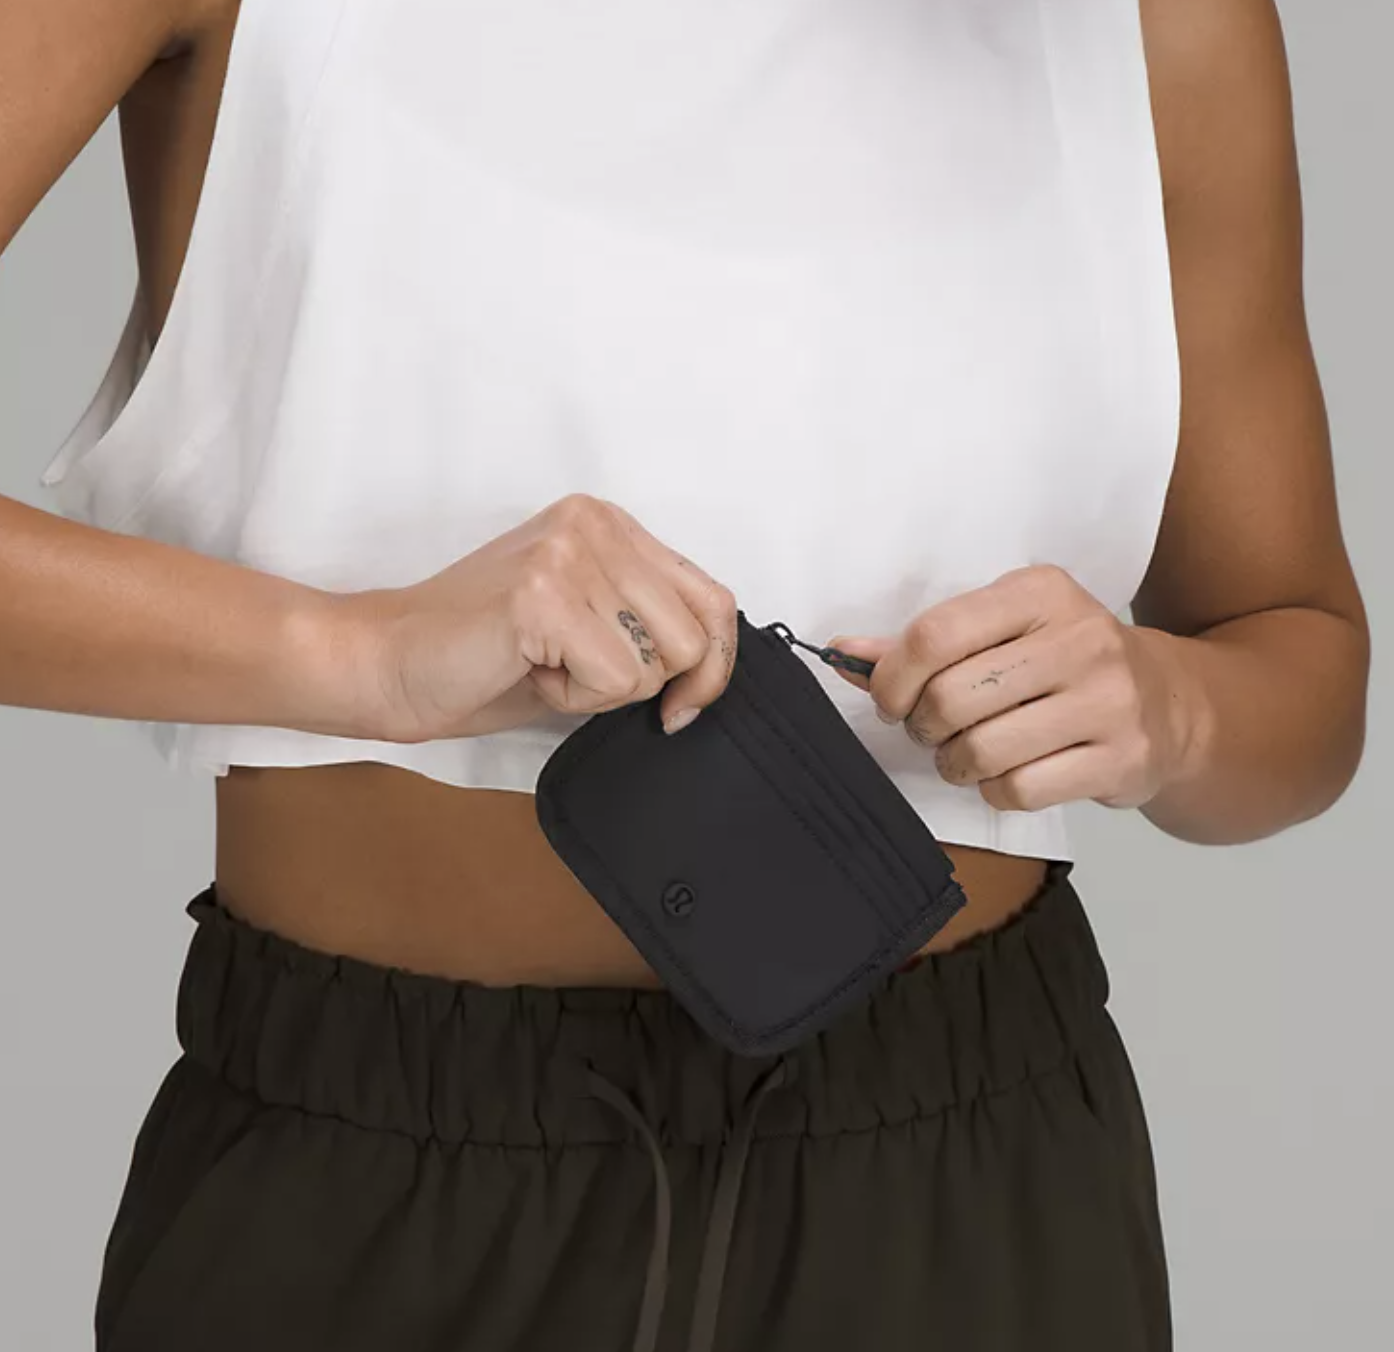 A person undoing the zipper on the card case